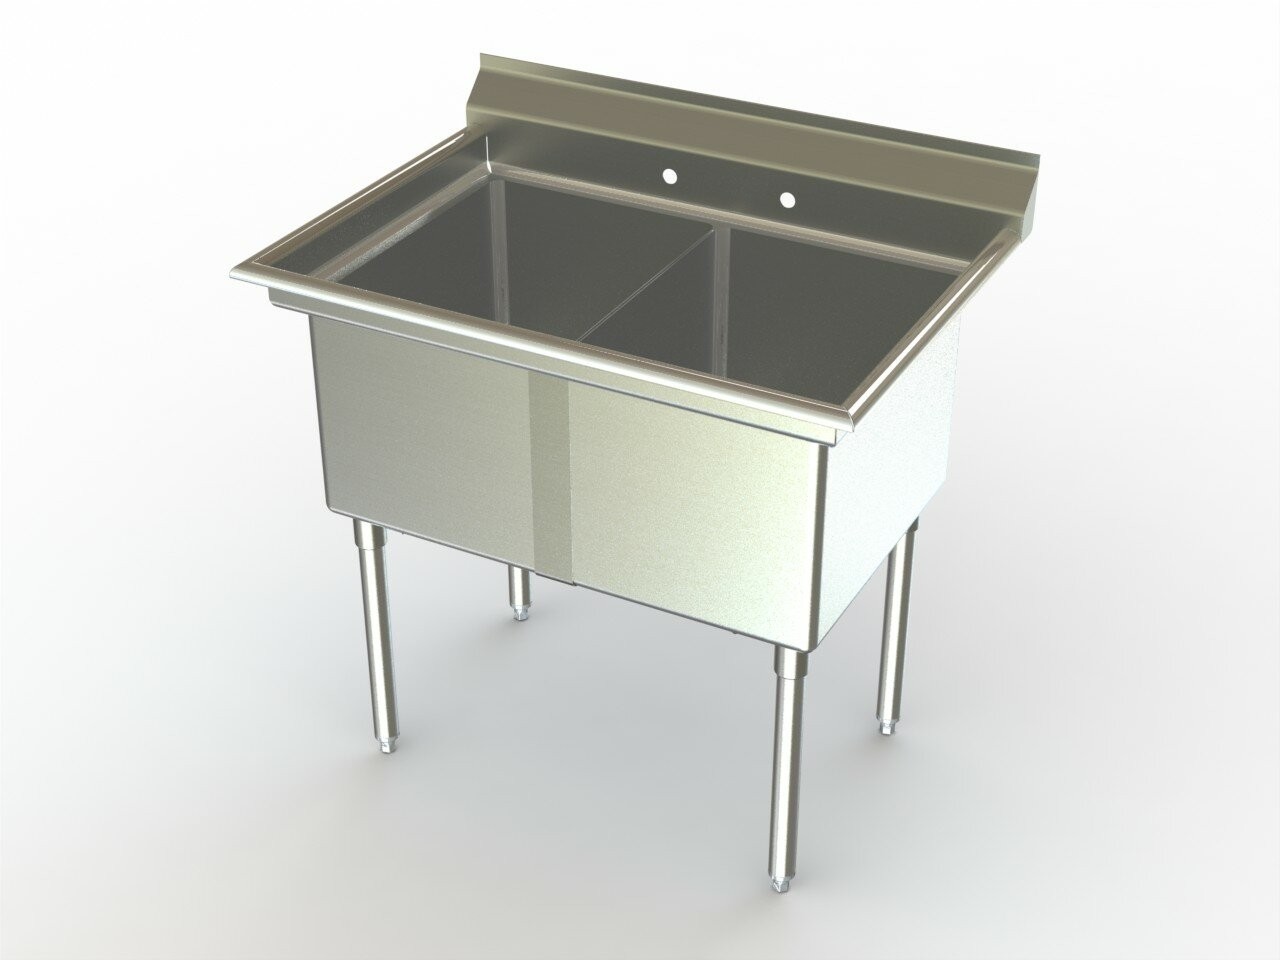 Deluxe NSF 21" x 22" Service Sink